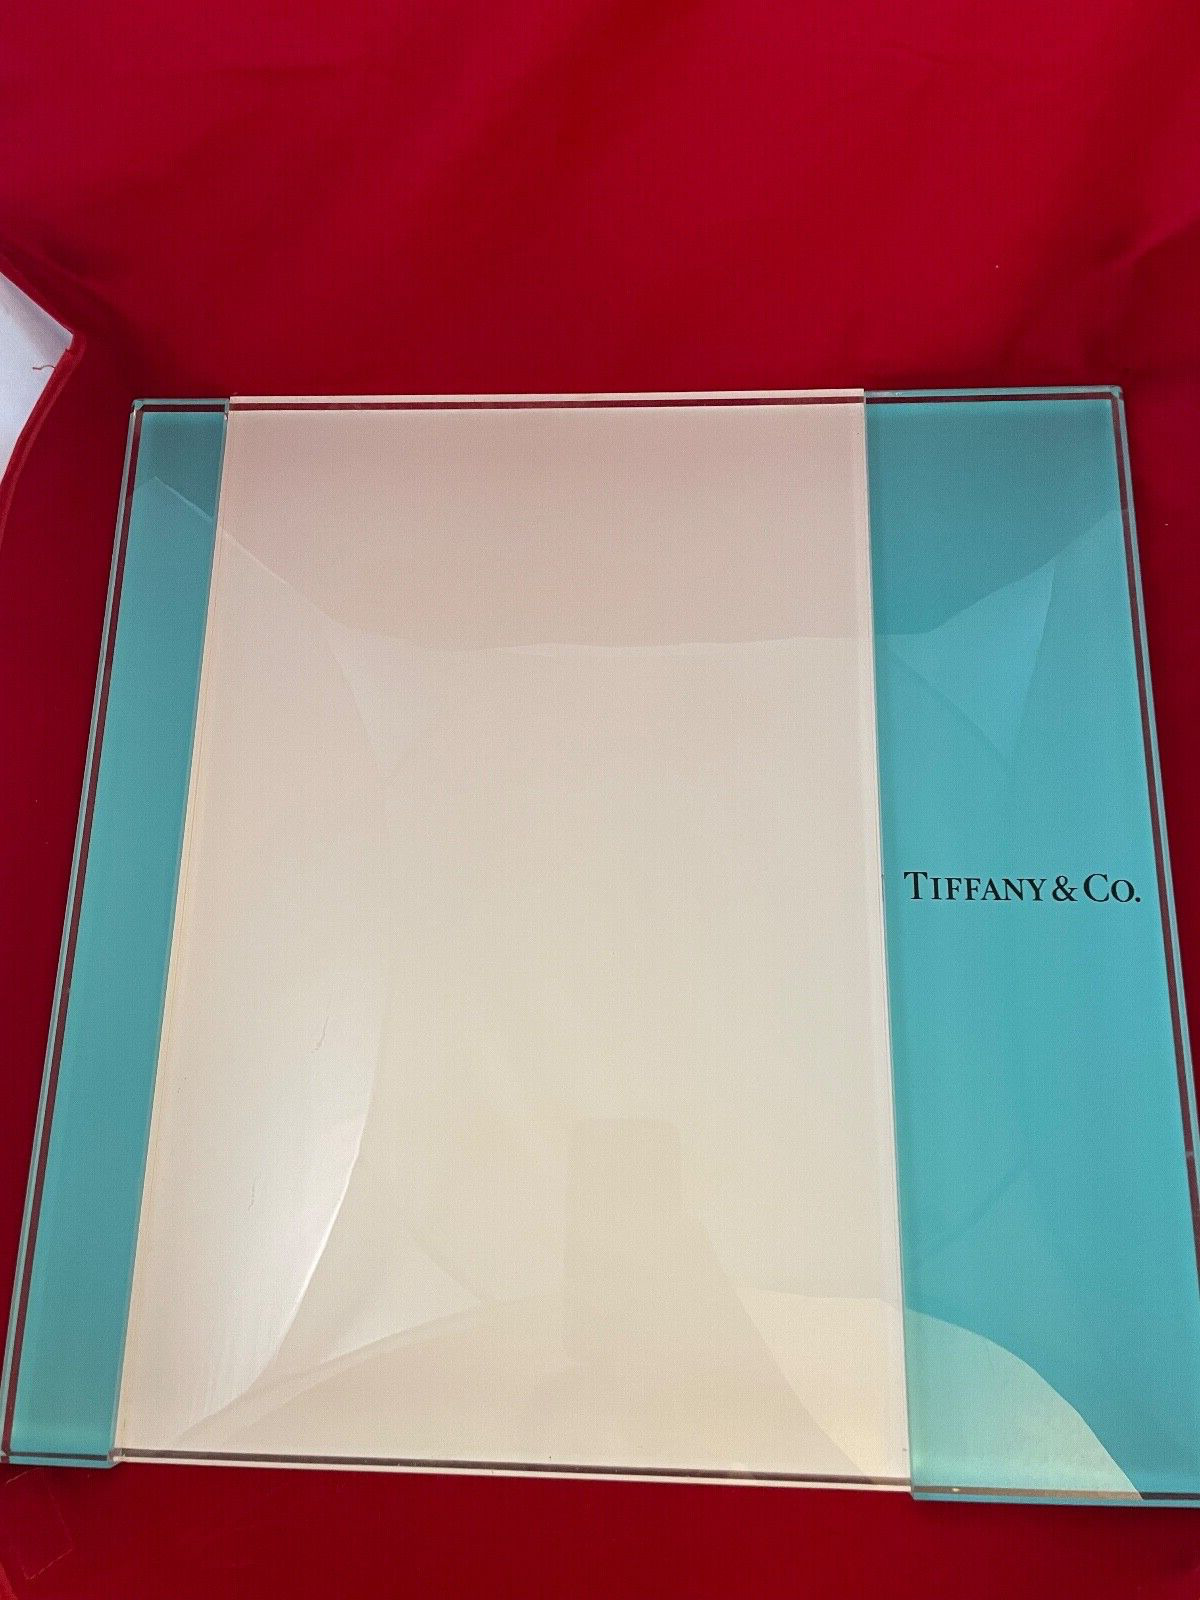 TIFFANY & CO SUNGLASSES & JEWELRY PAD DISPLAY, SHOW CASE. LARGE,